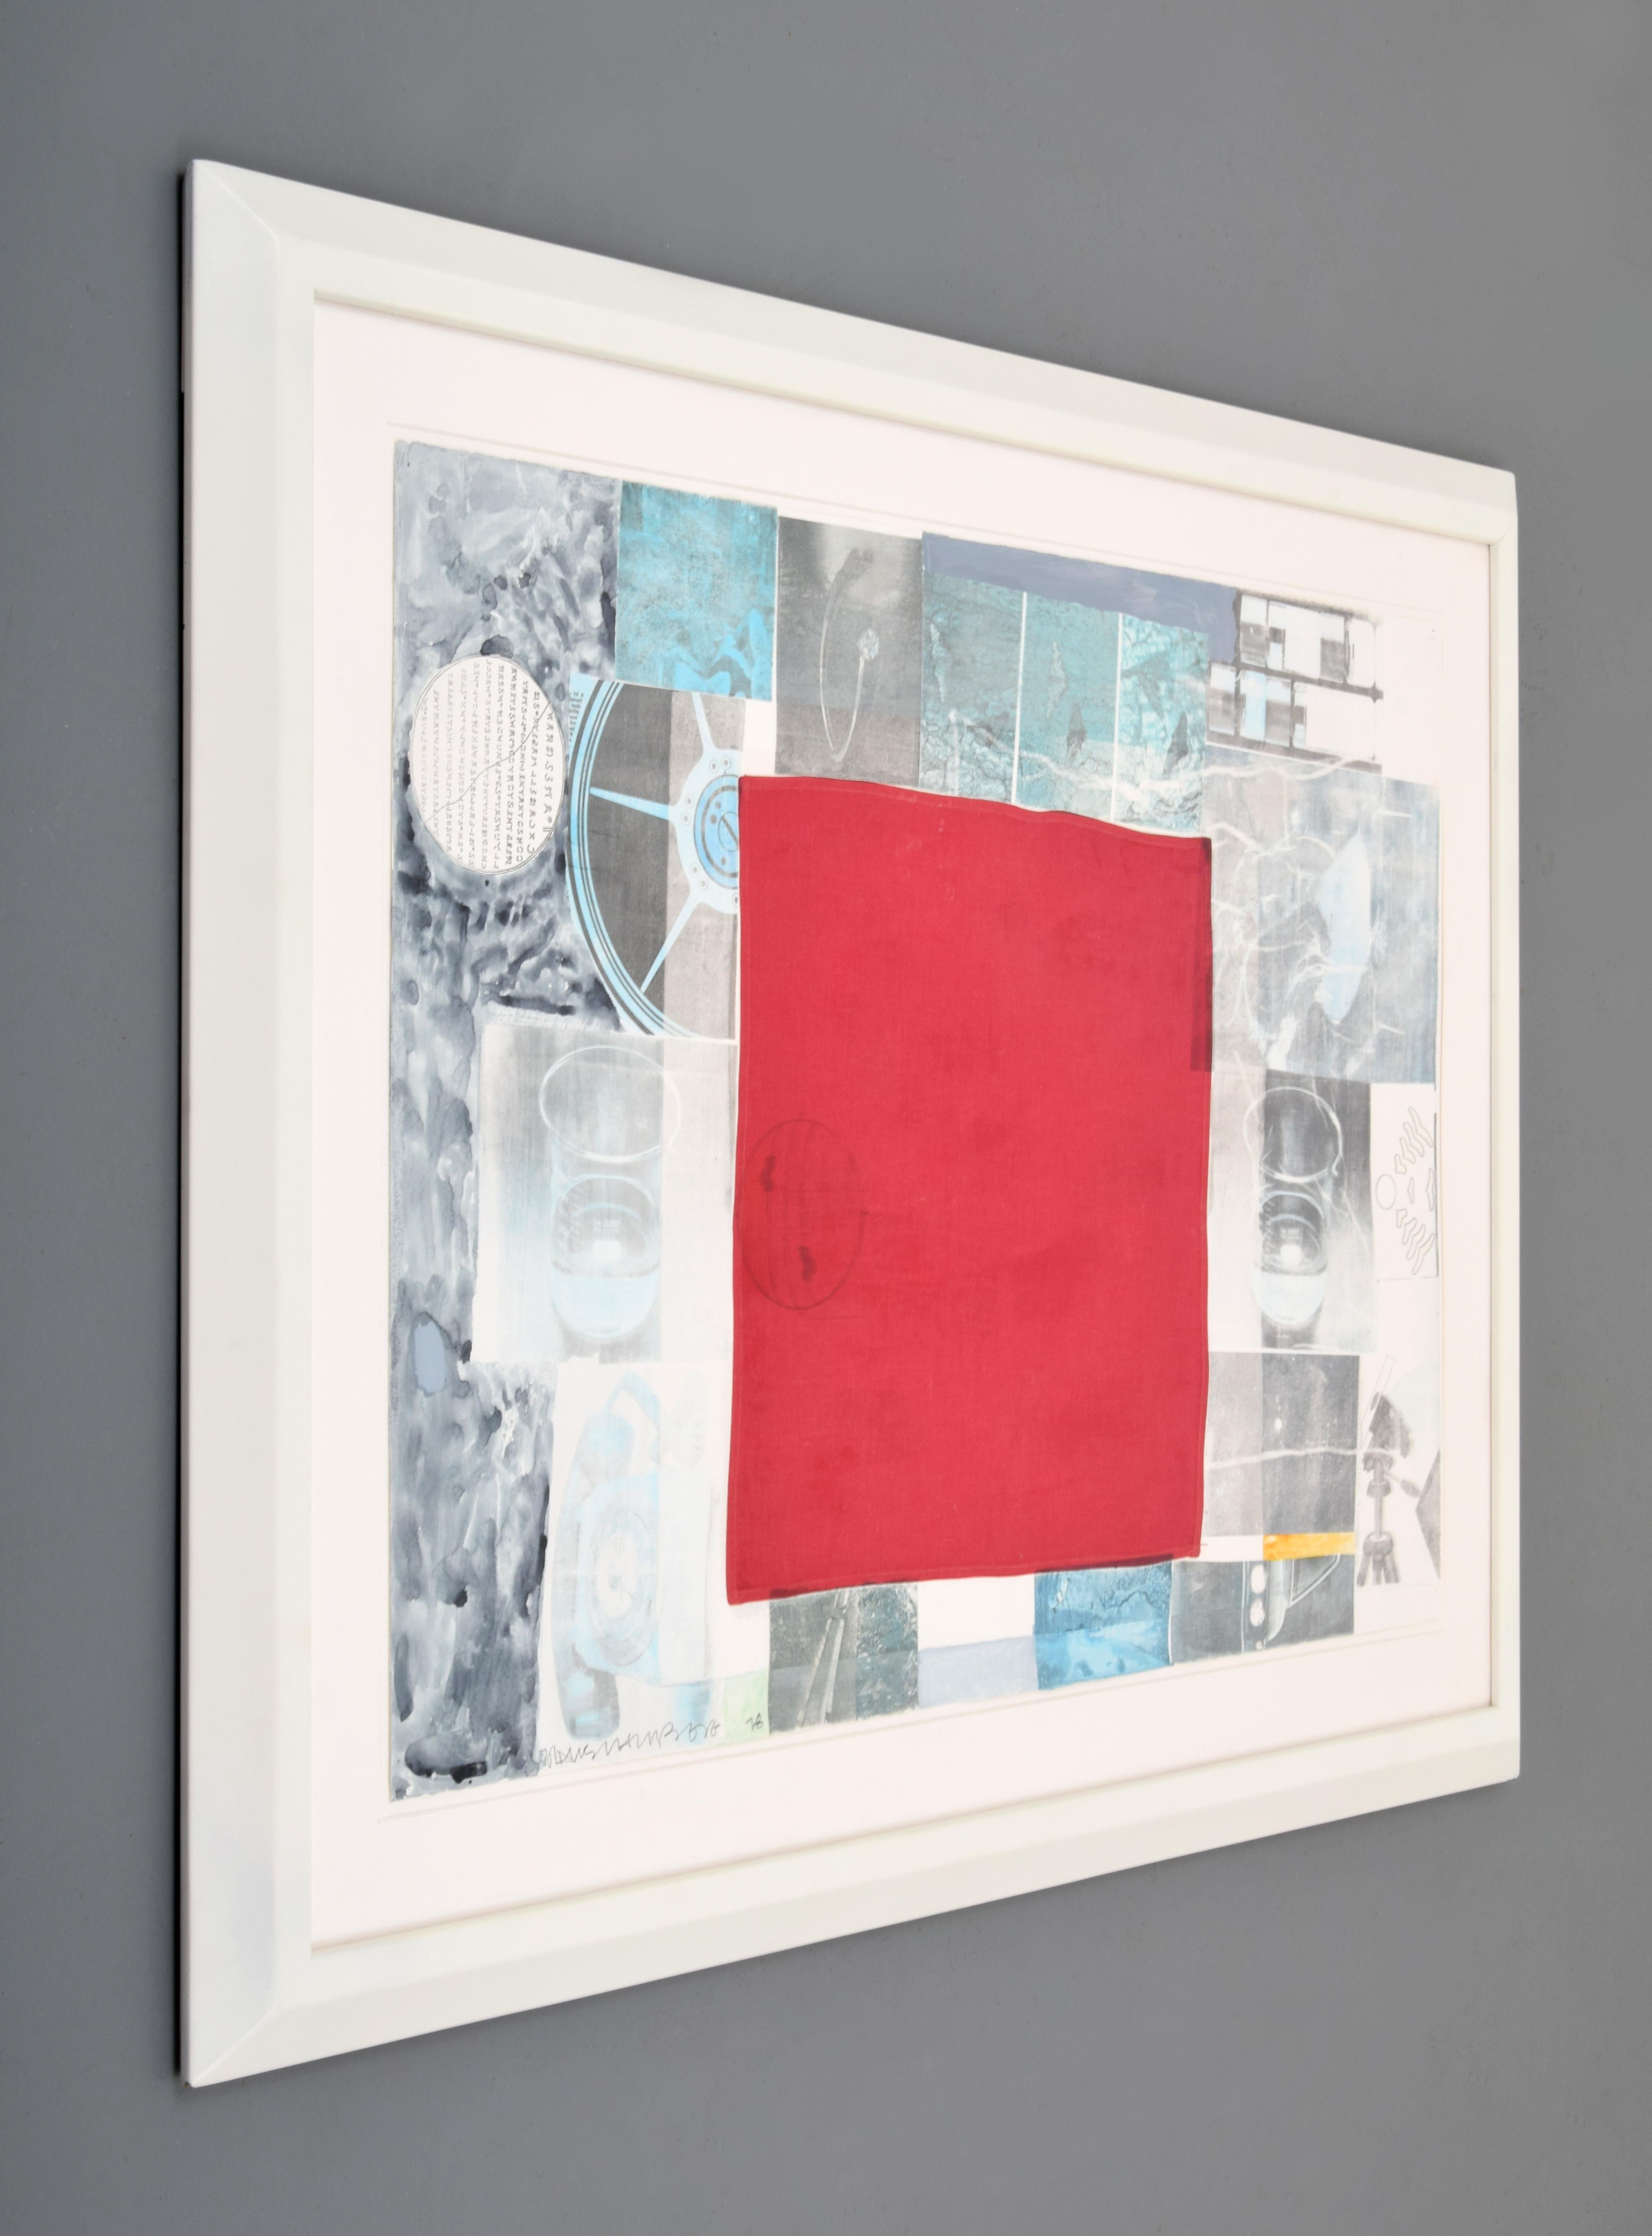 Large mixed media collage by Robert Rauschenberg (1925-2008). Gallery labels to reverse: The Sable-Castelli Gallery, Ltd, New York, New York; Evelyn Aimis Fine Art, Miami/Toronto. Provenance: The Sable-Castelli Gallery, Ltd, New York, New York;